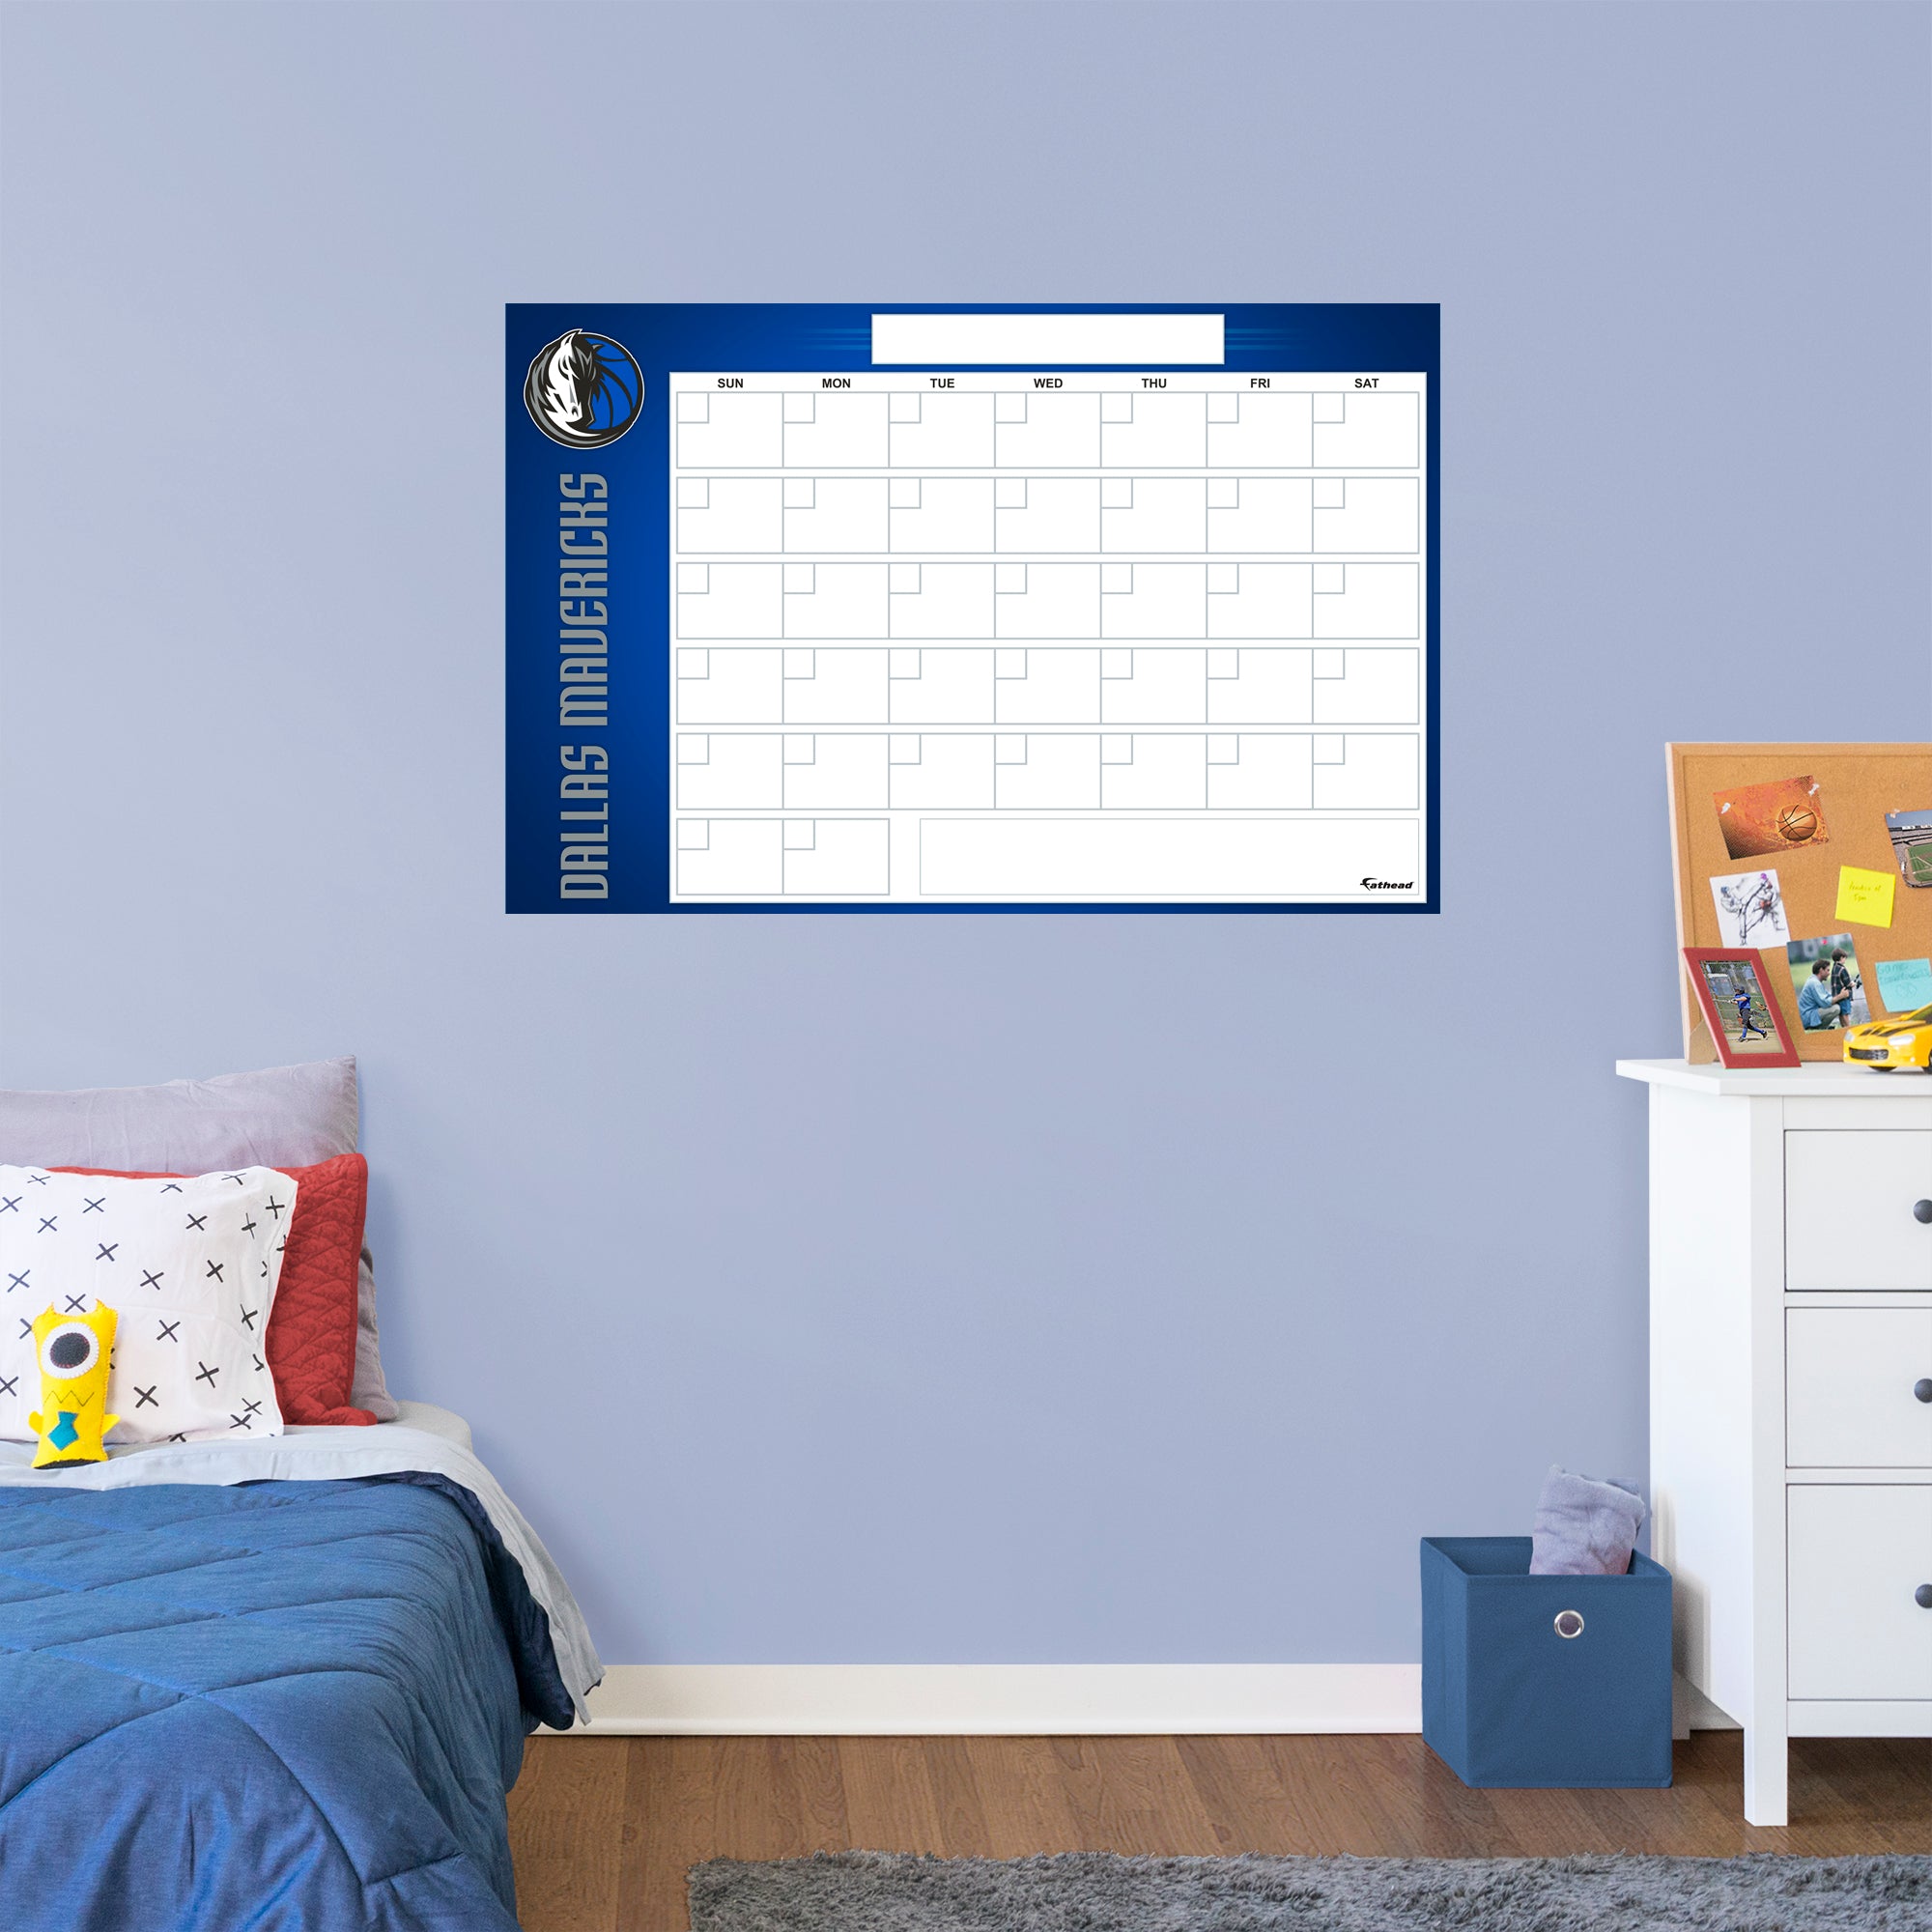 Dallas Mavericks Dry Erase Calendar - Officially Licensed NBA Removable Wall Decal Giant Decal (34"W x 52"H) by Fathead | Vinyl